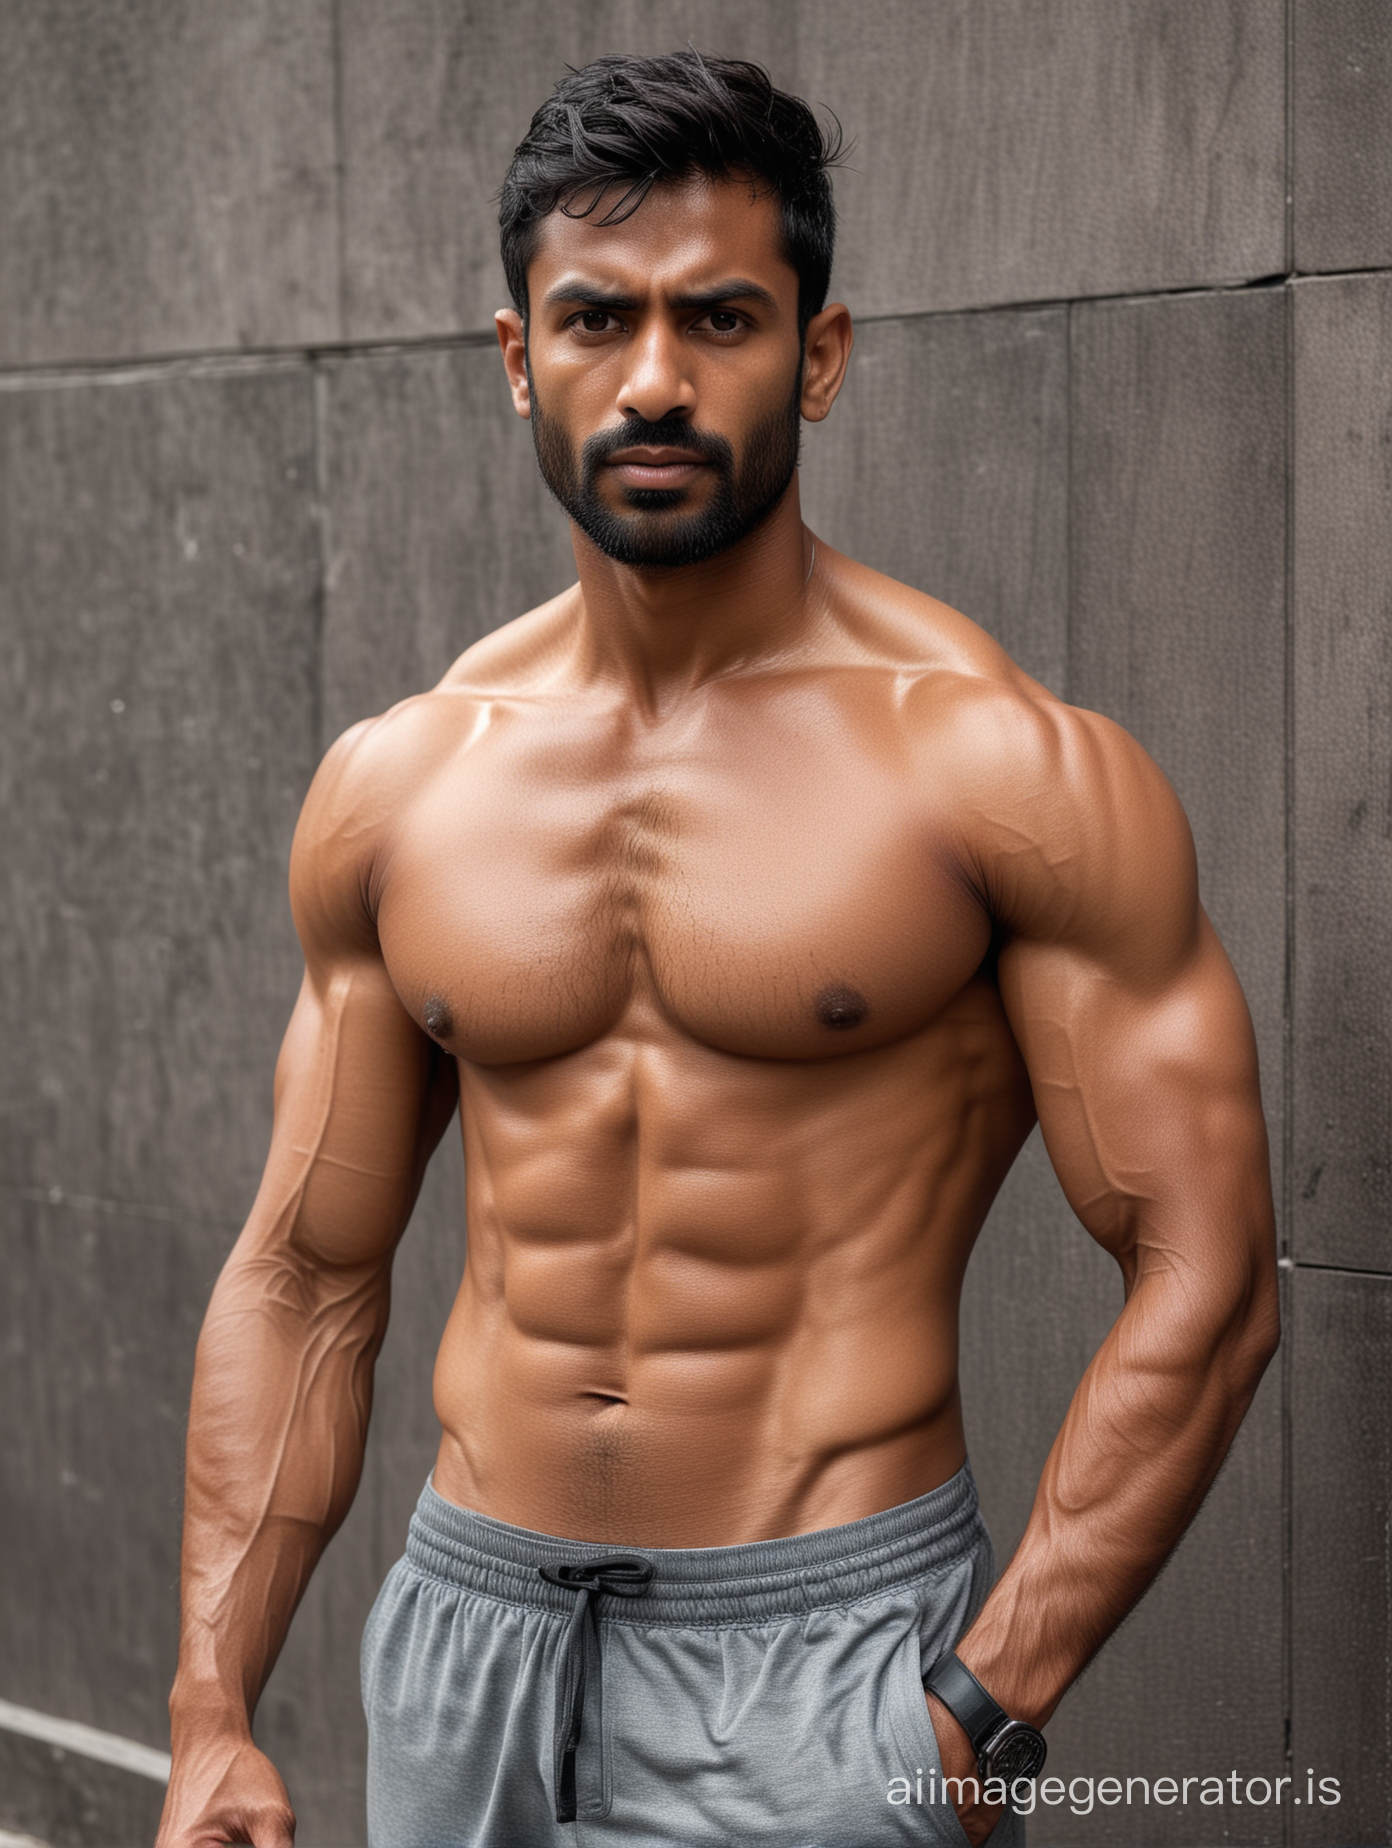 Indian shirtless sweaty muscular man doing a break from workout, looking concentrated